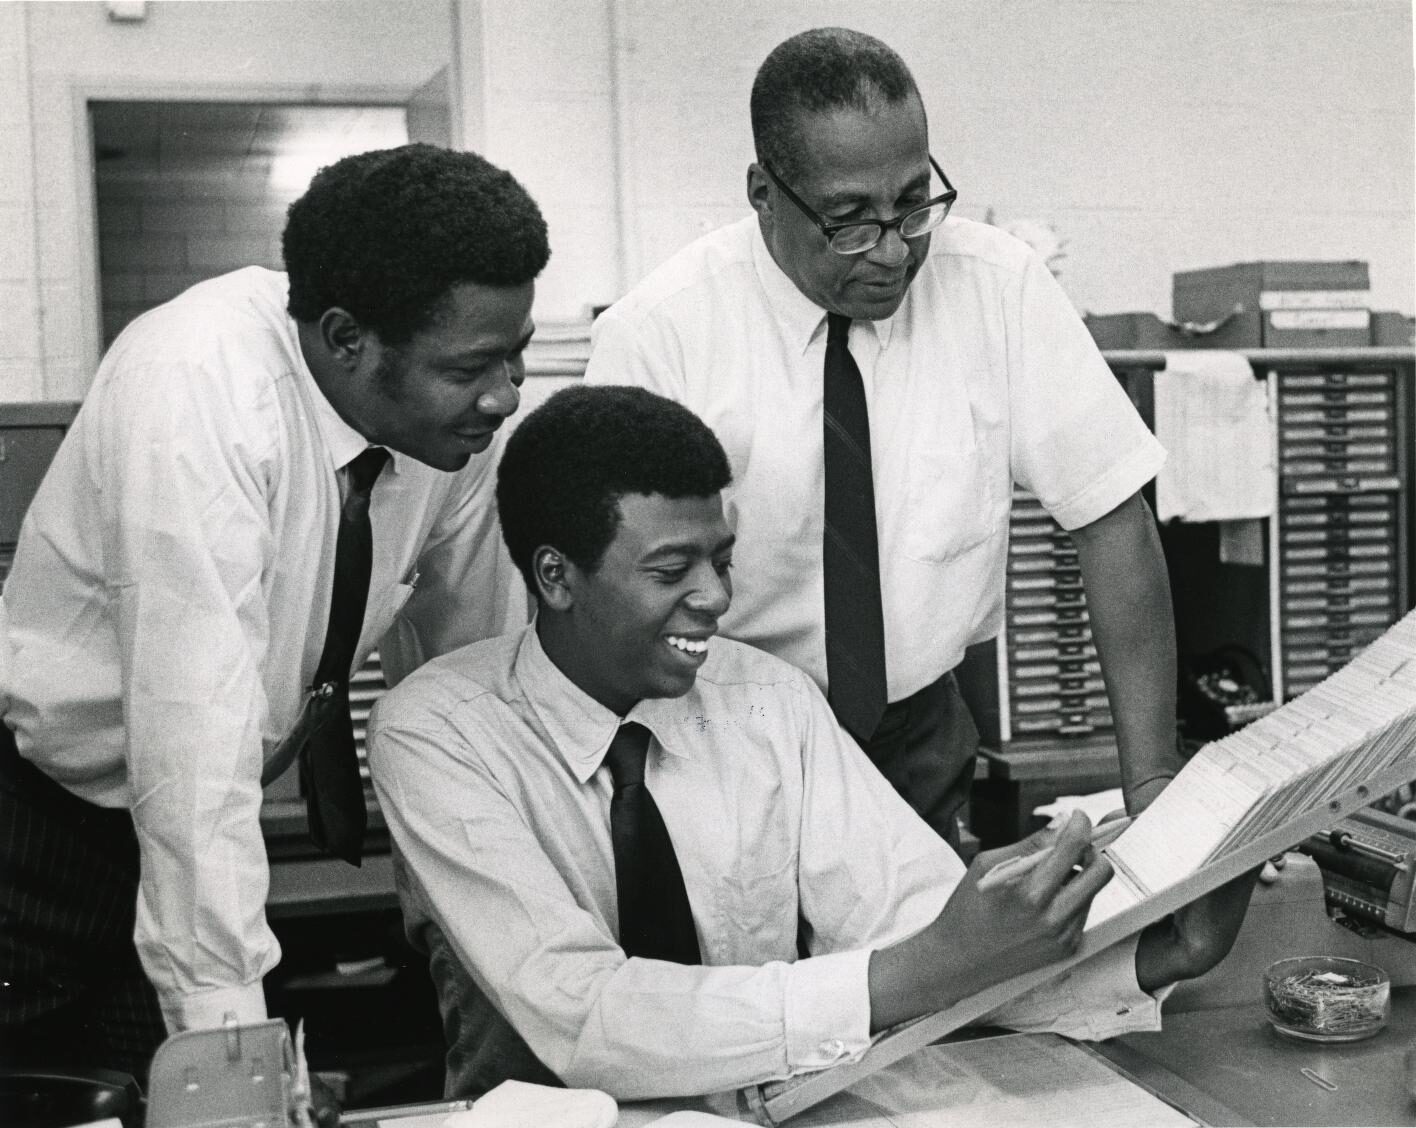 Photo of three Black men in white shirts and ties using card catalog.